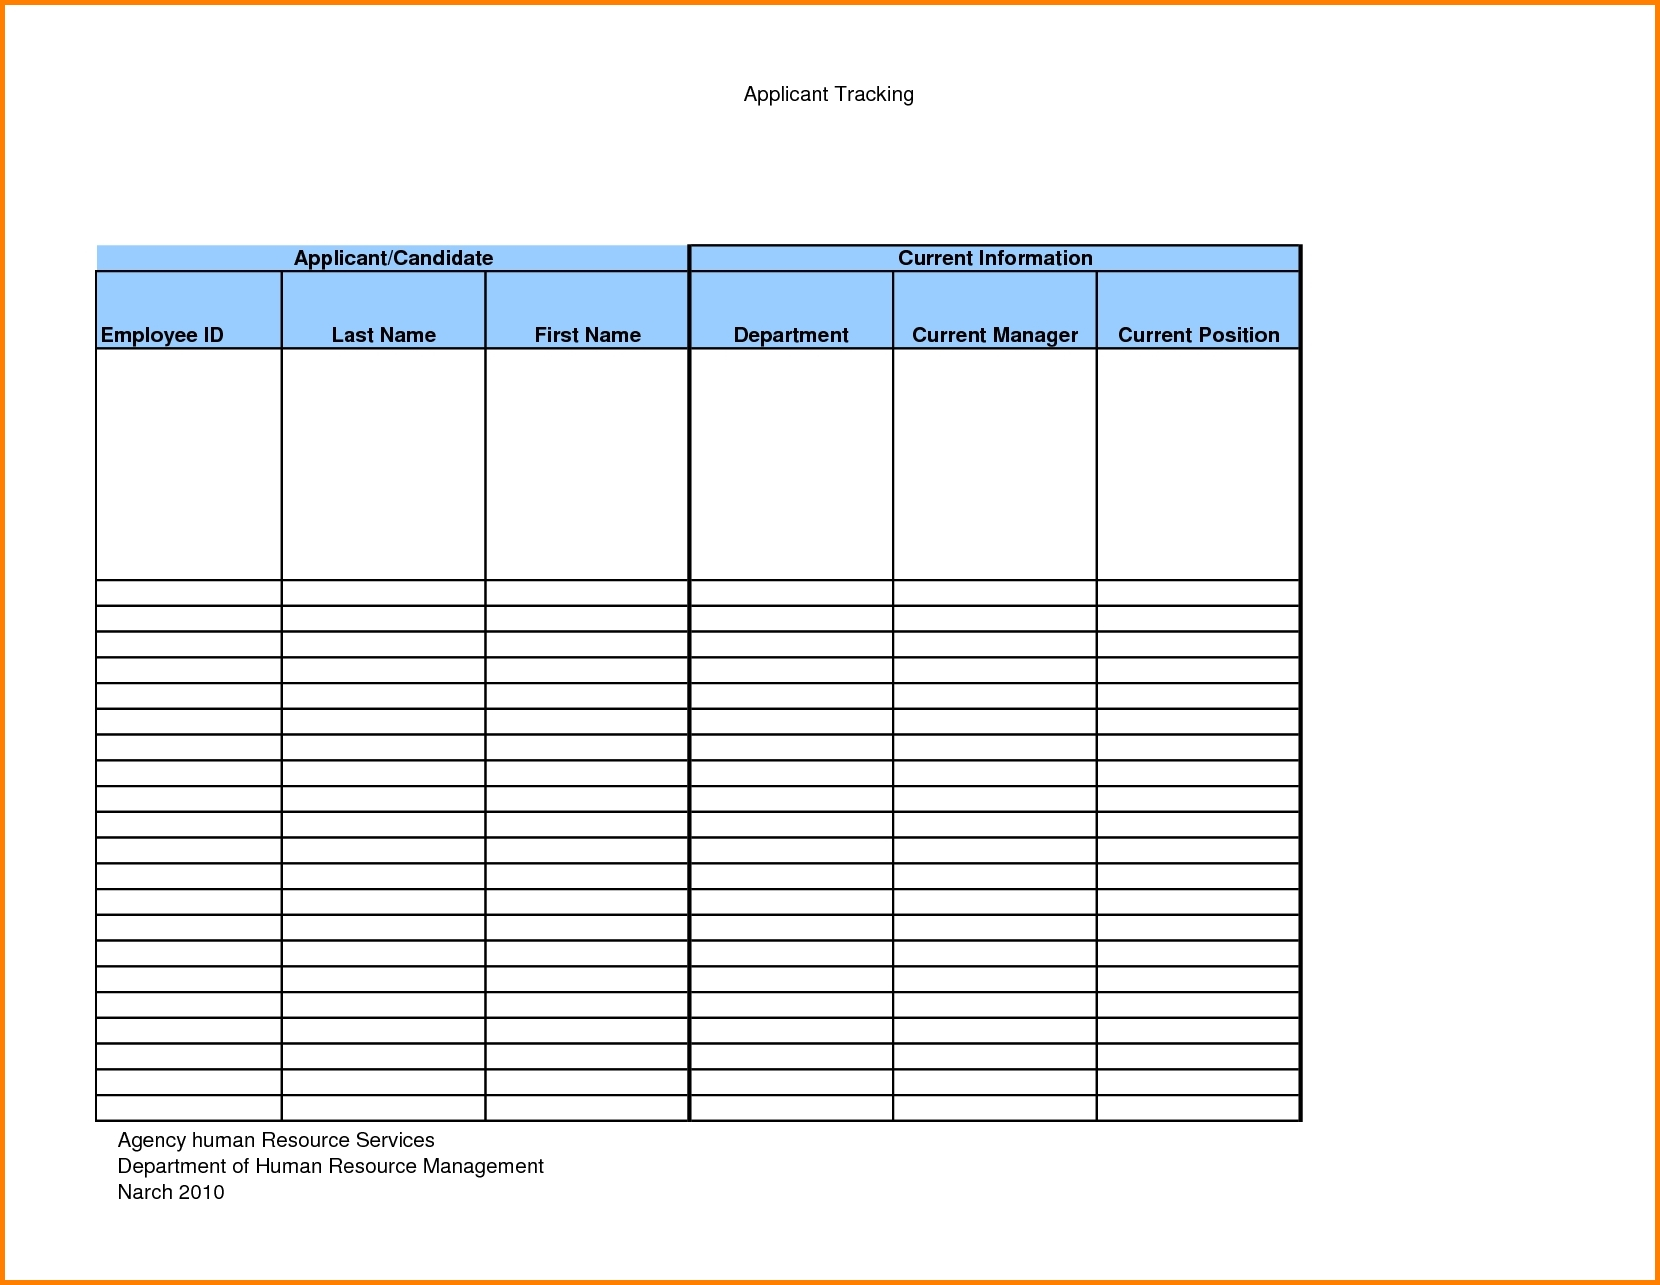 4 Applicant Tracking Spreadsheet | Balance Spreadsheet With Intended For Applicant Tracking Spreadsheet Excel